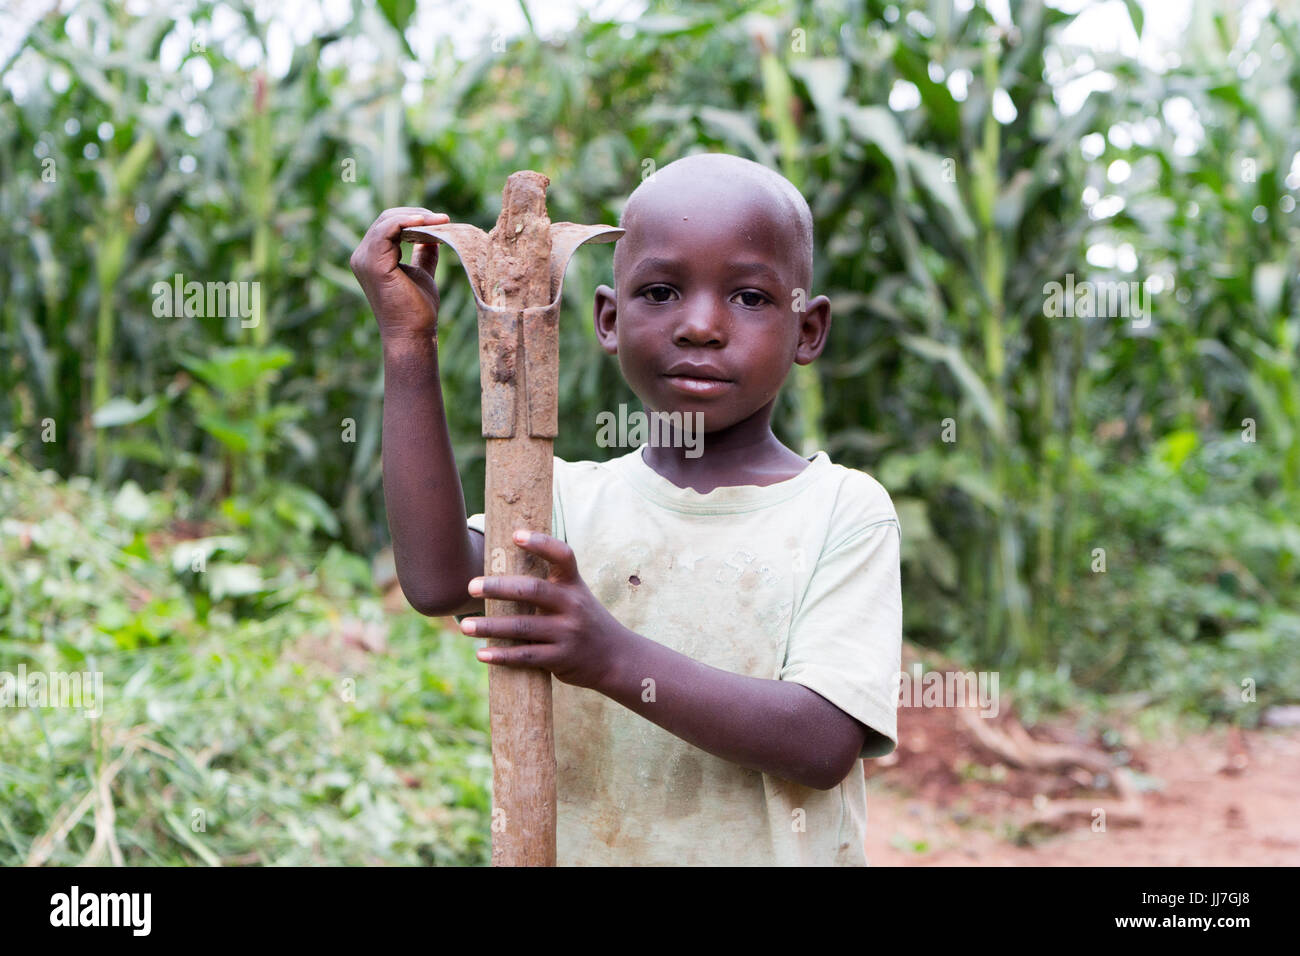 A black African Ugandan child boy holding a hoe on its shoulder. The boy is in poor rag clothes and rubber boots Stock Photo